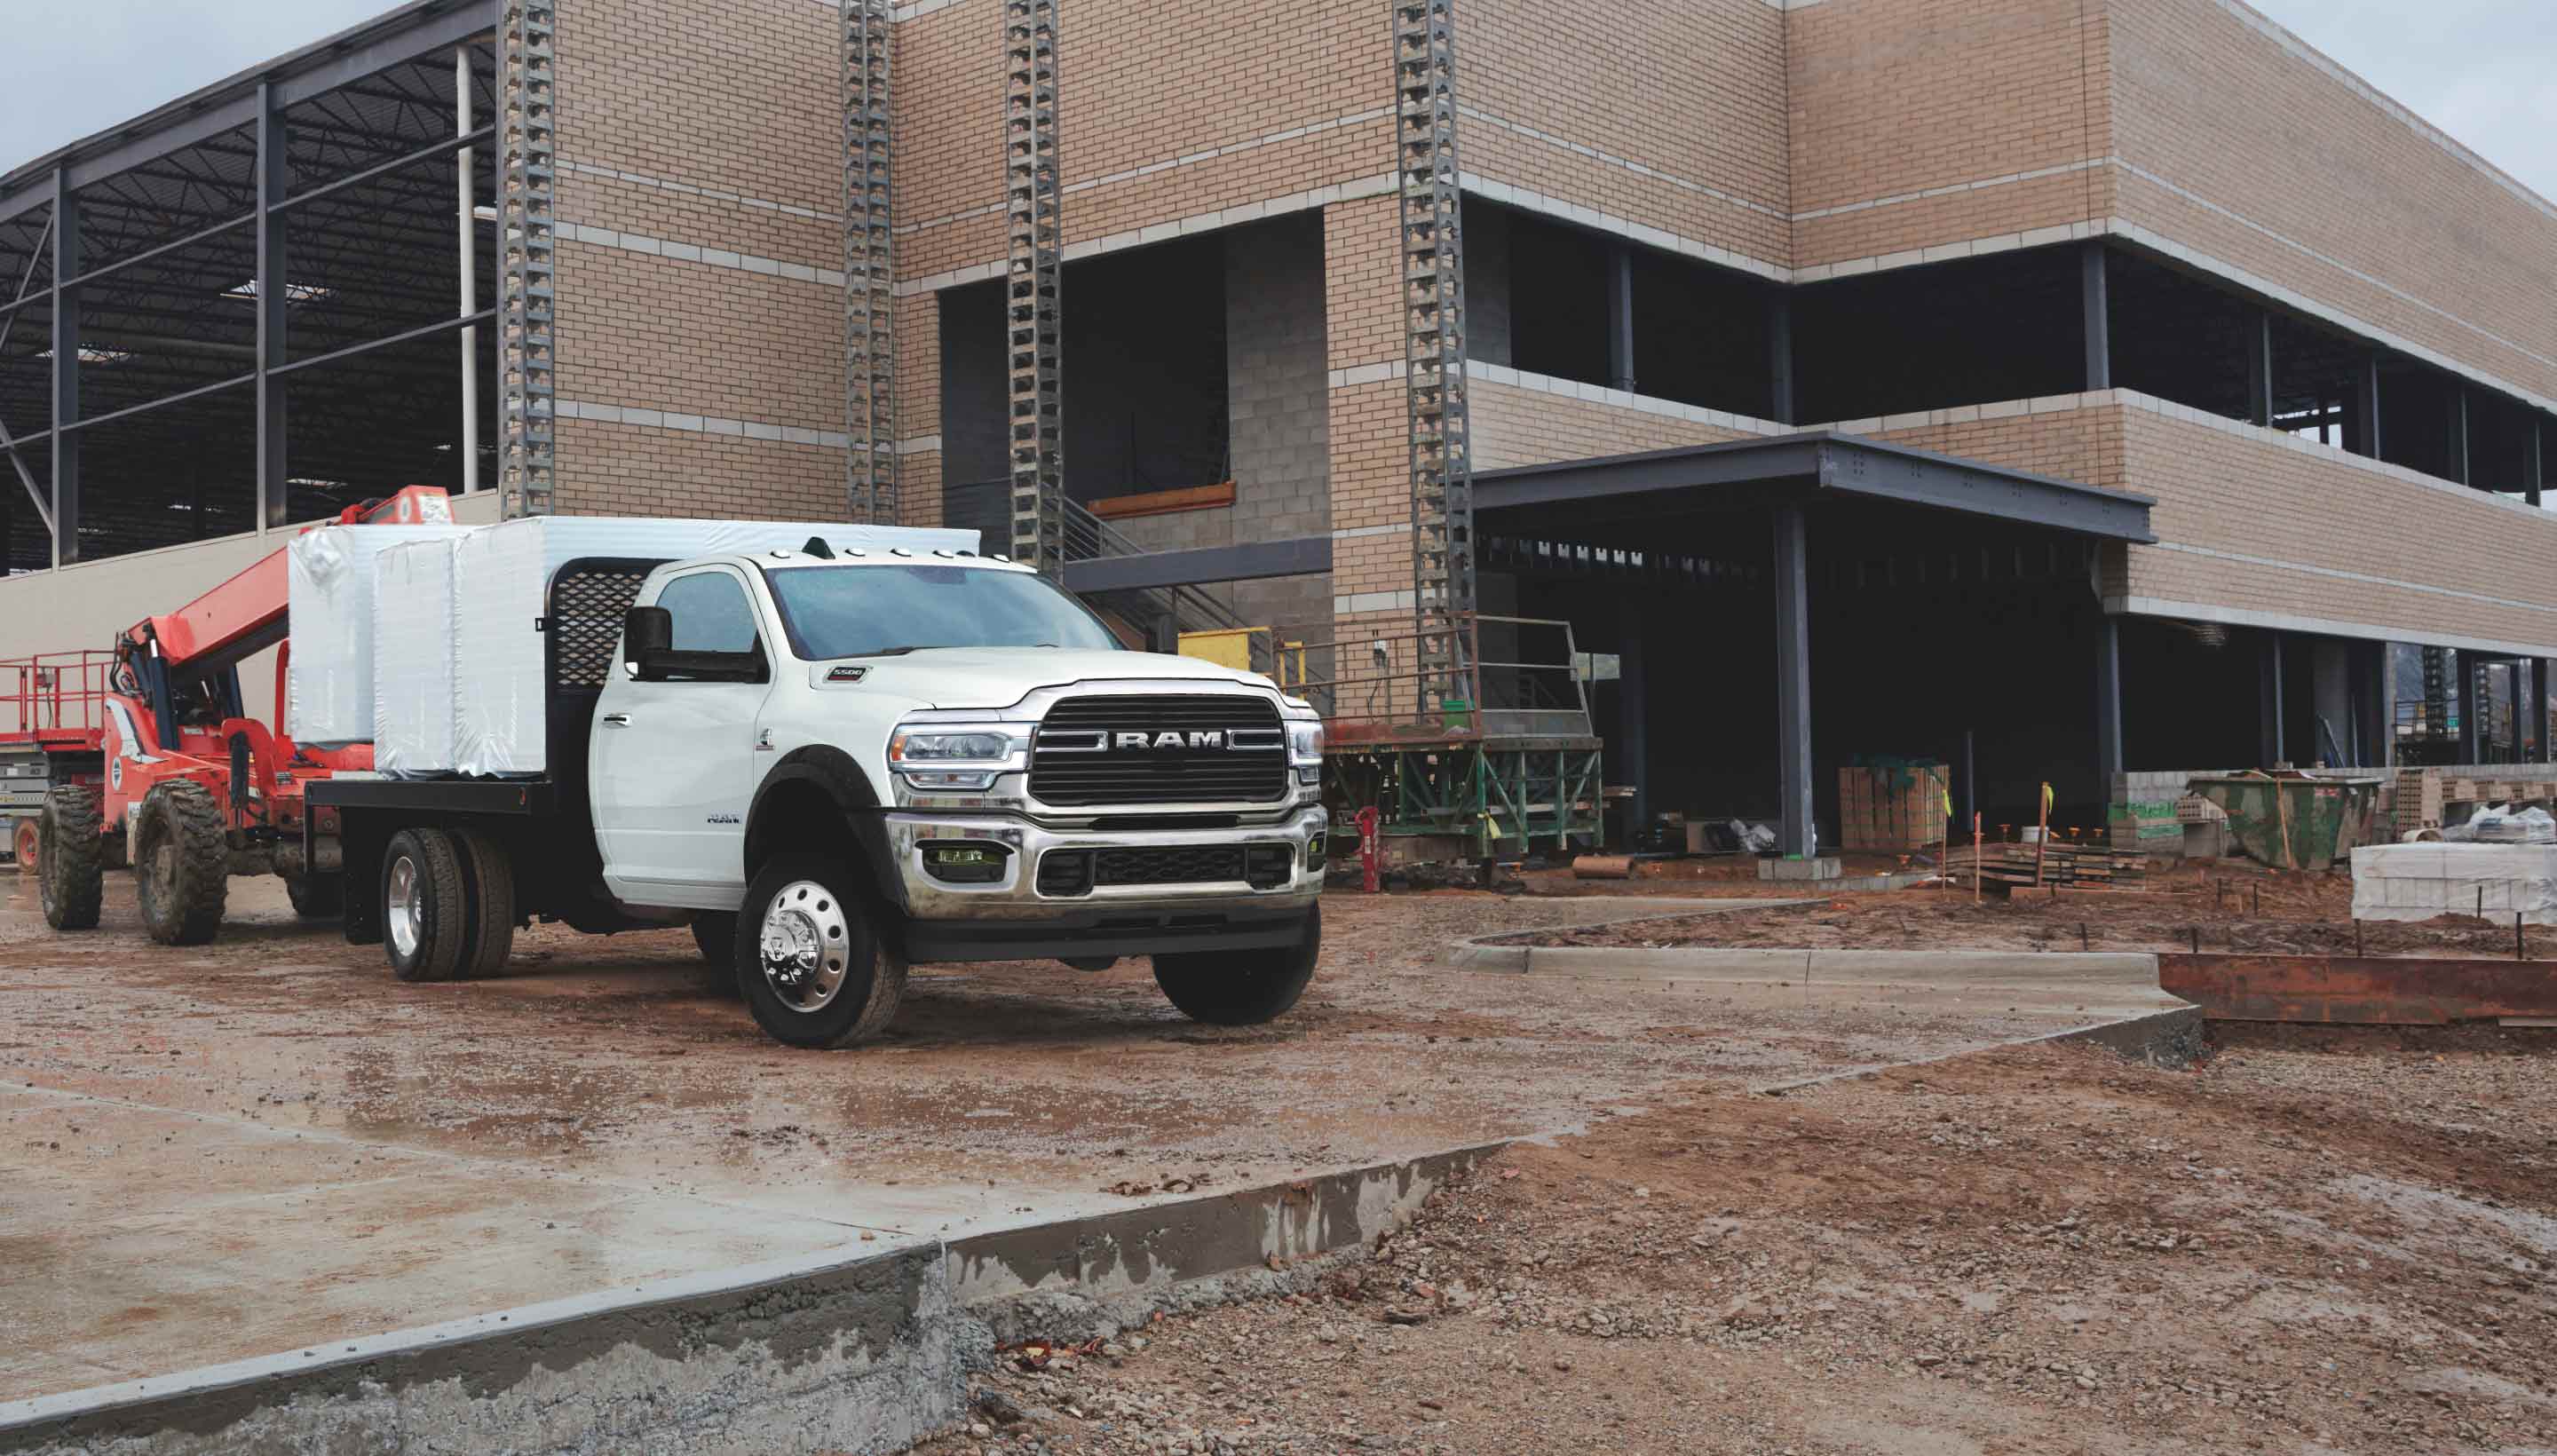 A 2022 Ram Chassis Cab on a construction site, with a boom lift loading tightly wrapped pallets onto the truck flat bed.